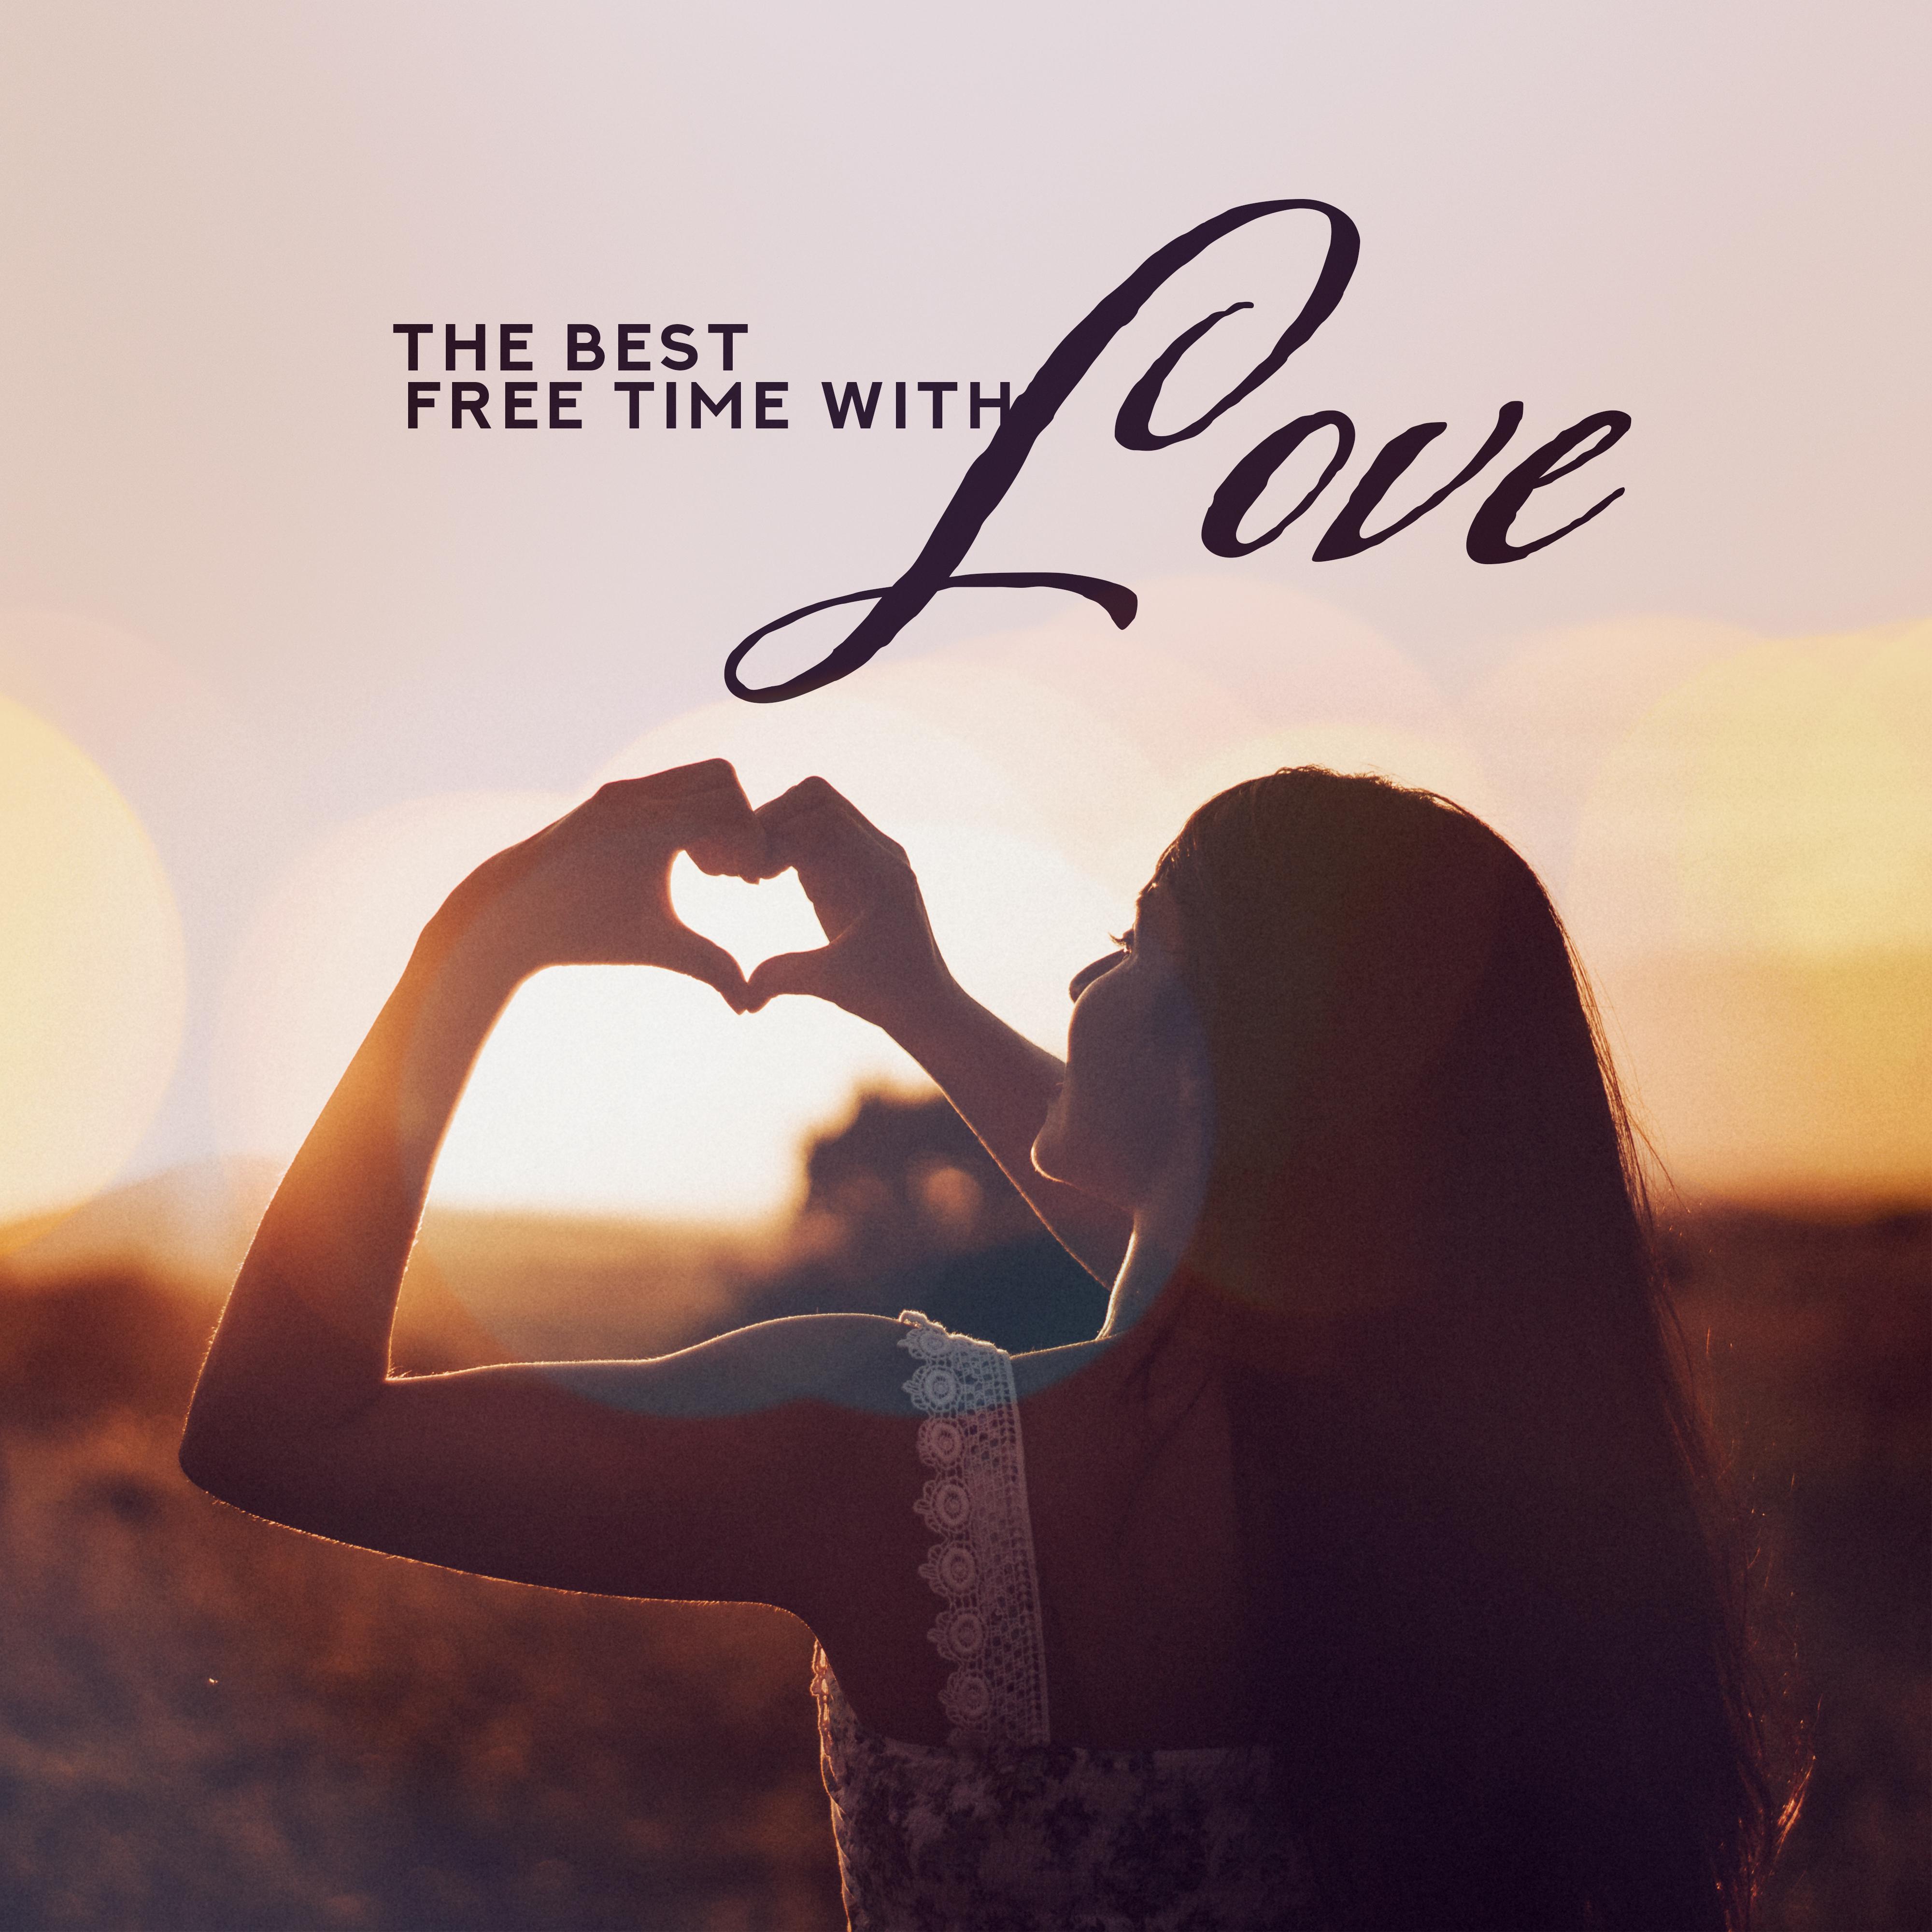 The Best Free Time with Love – Romantic Smooth Jazz 2019 Music Compilation for Couples, Best Time Spending Together, Romantic Dinner & Evening Full of Love